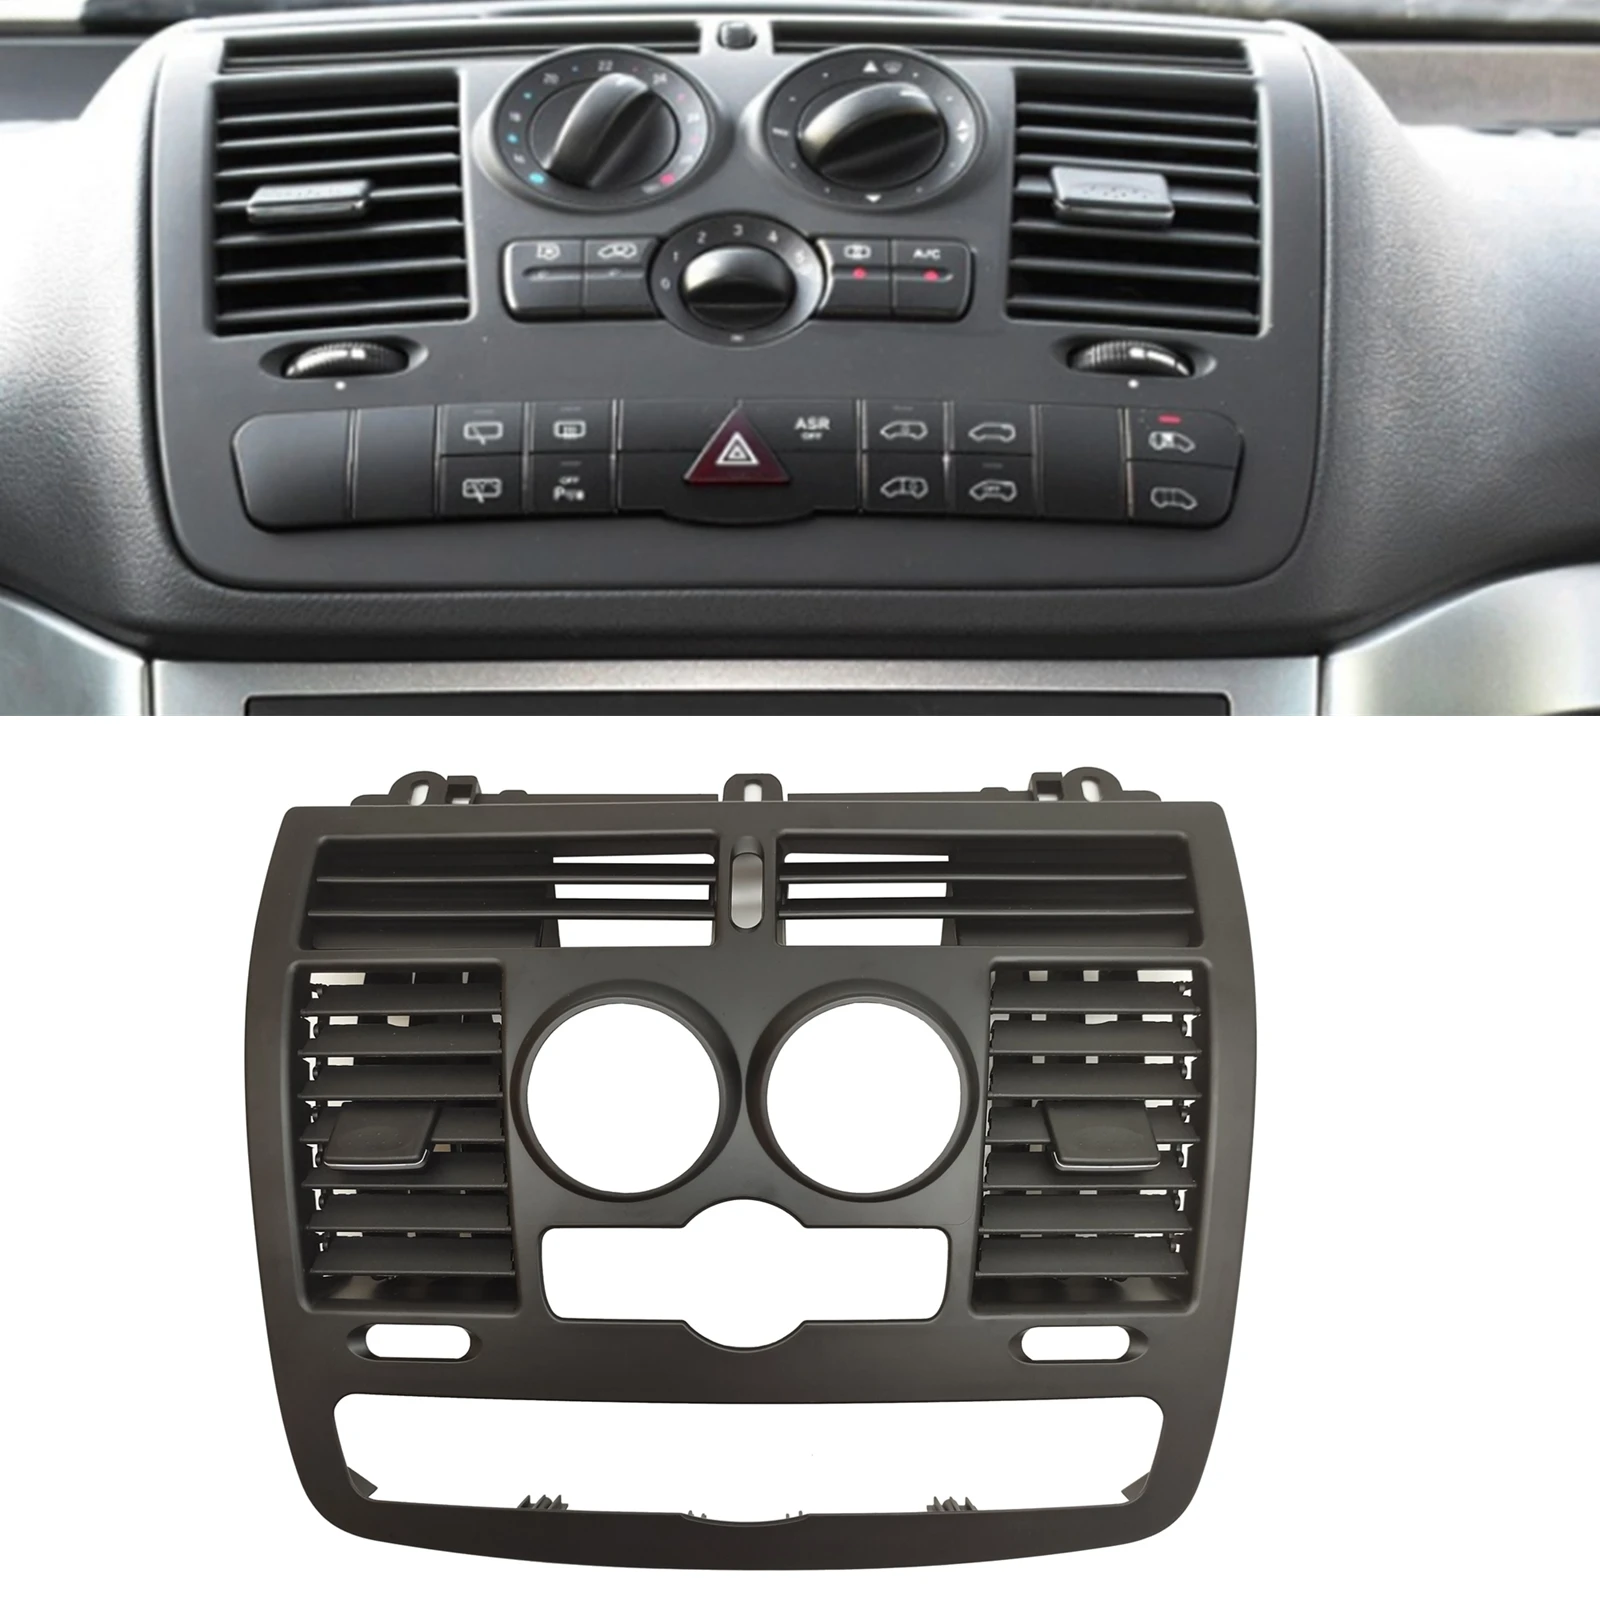 

Center Console Dashboard A/C Air Vent Cover Outlet Grille For Mercedes Benz Vito W636 Mixto Furgon W639 Base Ver 2010-2015